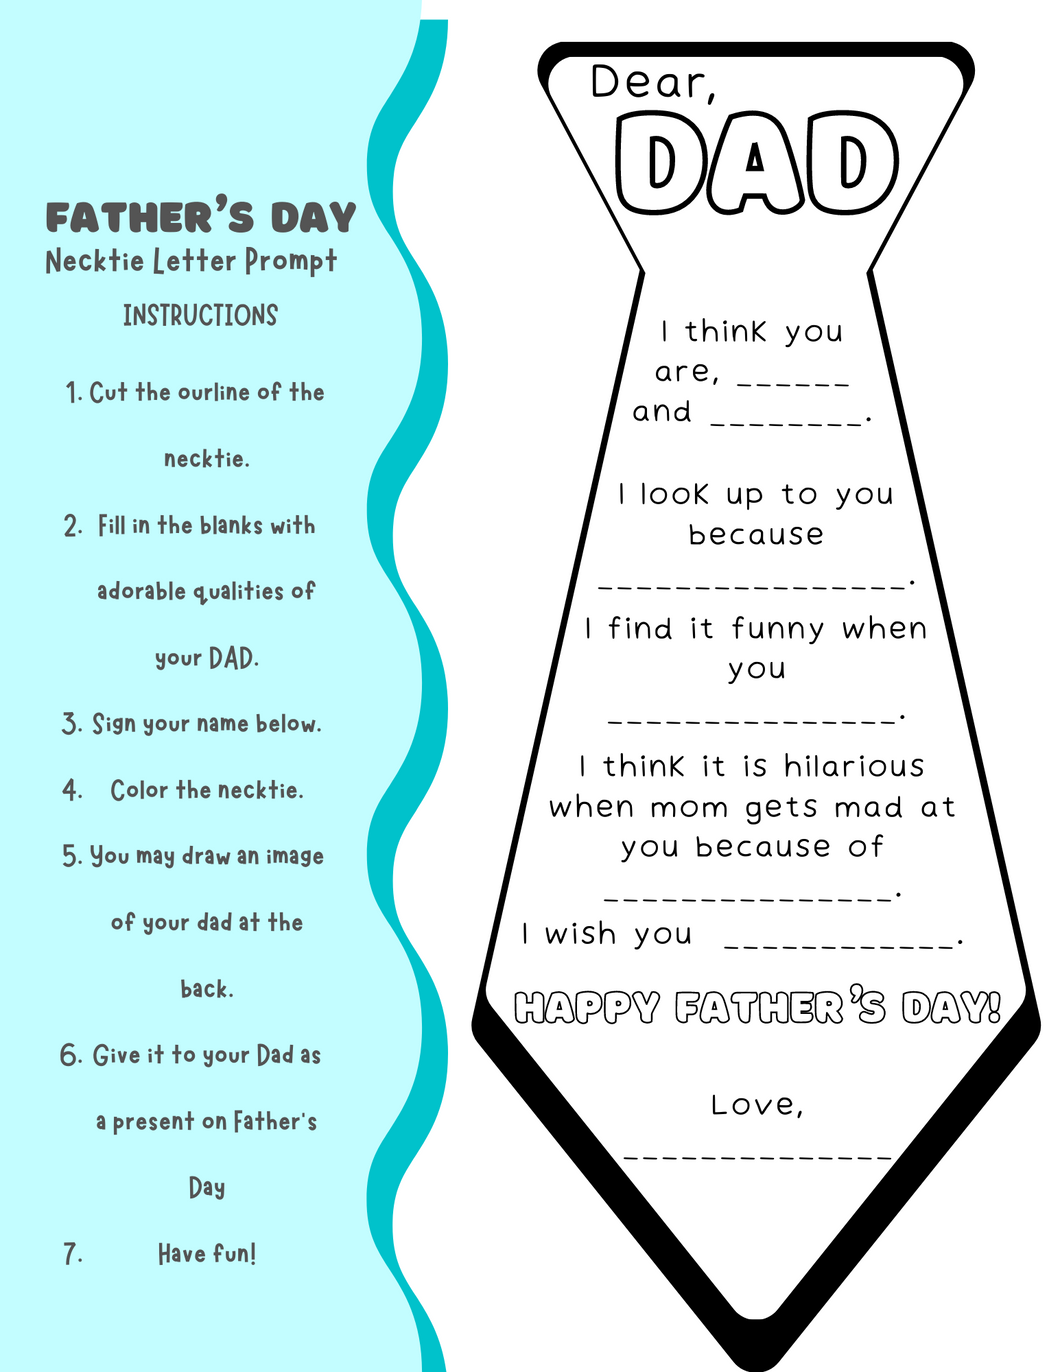 Father's Day Necktie Letter Prompt